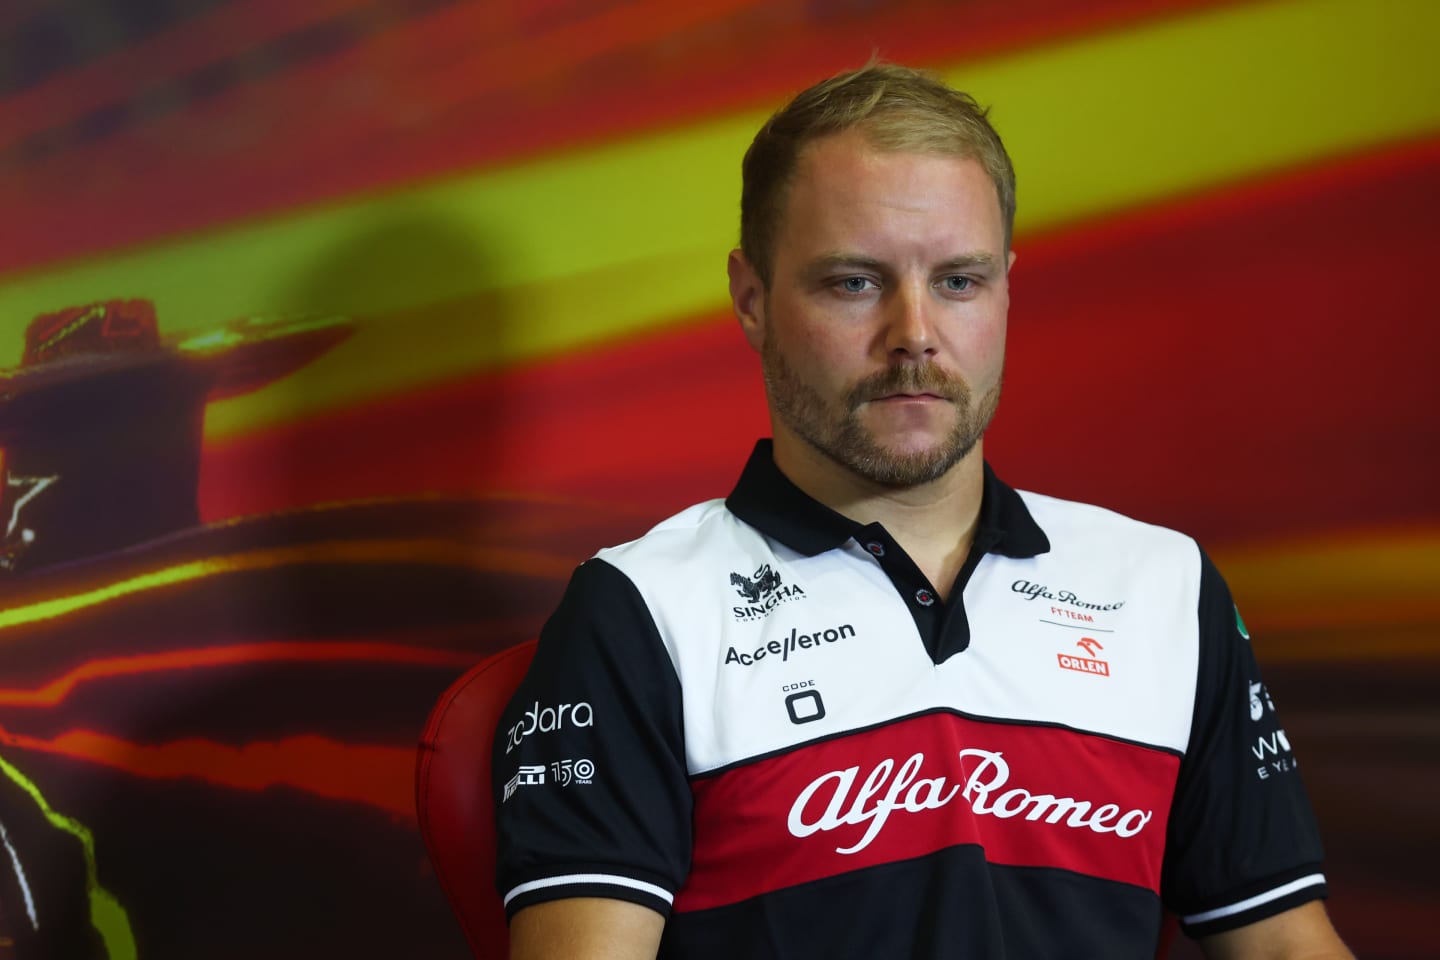 BARCELONA, SPAIN - MAY 20: Valtteri Bottas of Finland and Alfa Romeo F1 looks on in the Drivers Press Conference prior to practice ahead of the F1 Grand Prix of Spain at Circuit de Barcelona-Catalunya on May 20, 2022 in Barcelona, Spain. (Photo by Lars Baron/Getty Images)